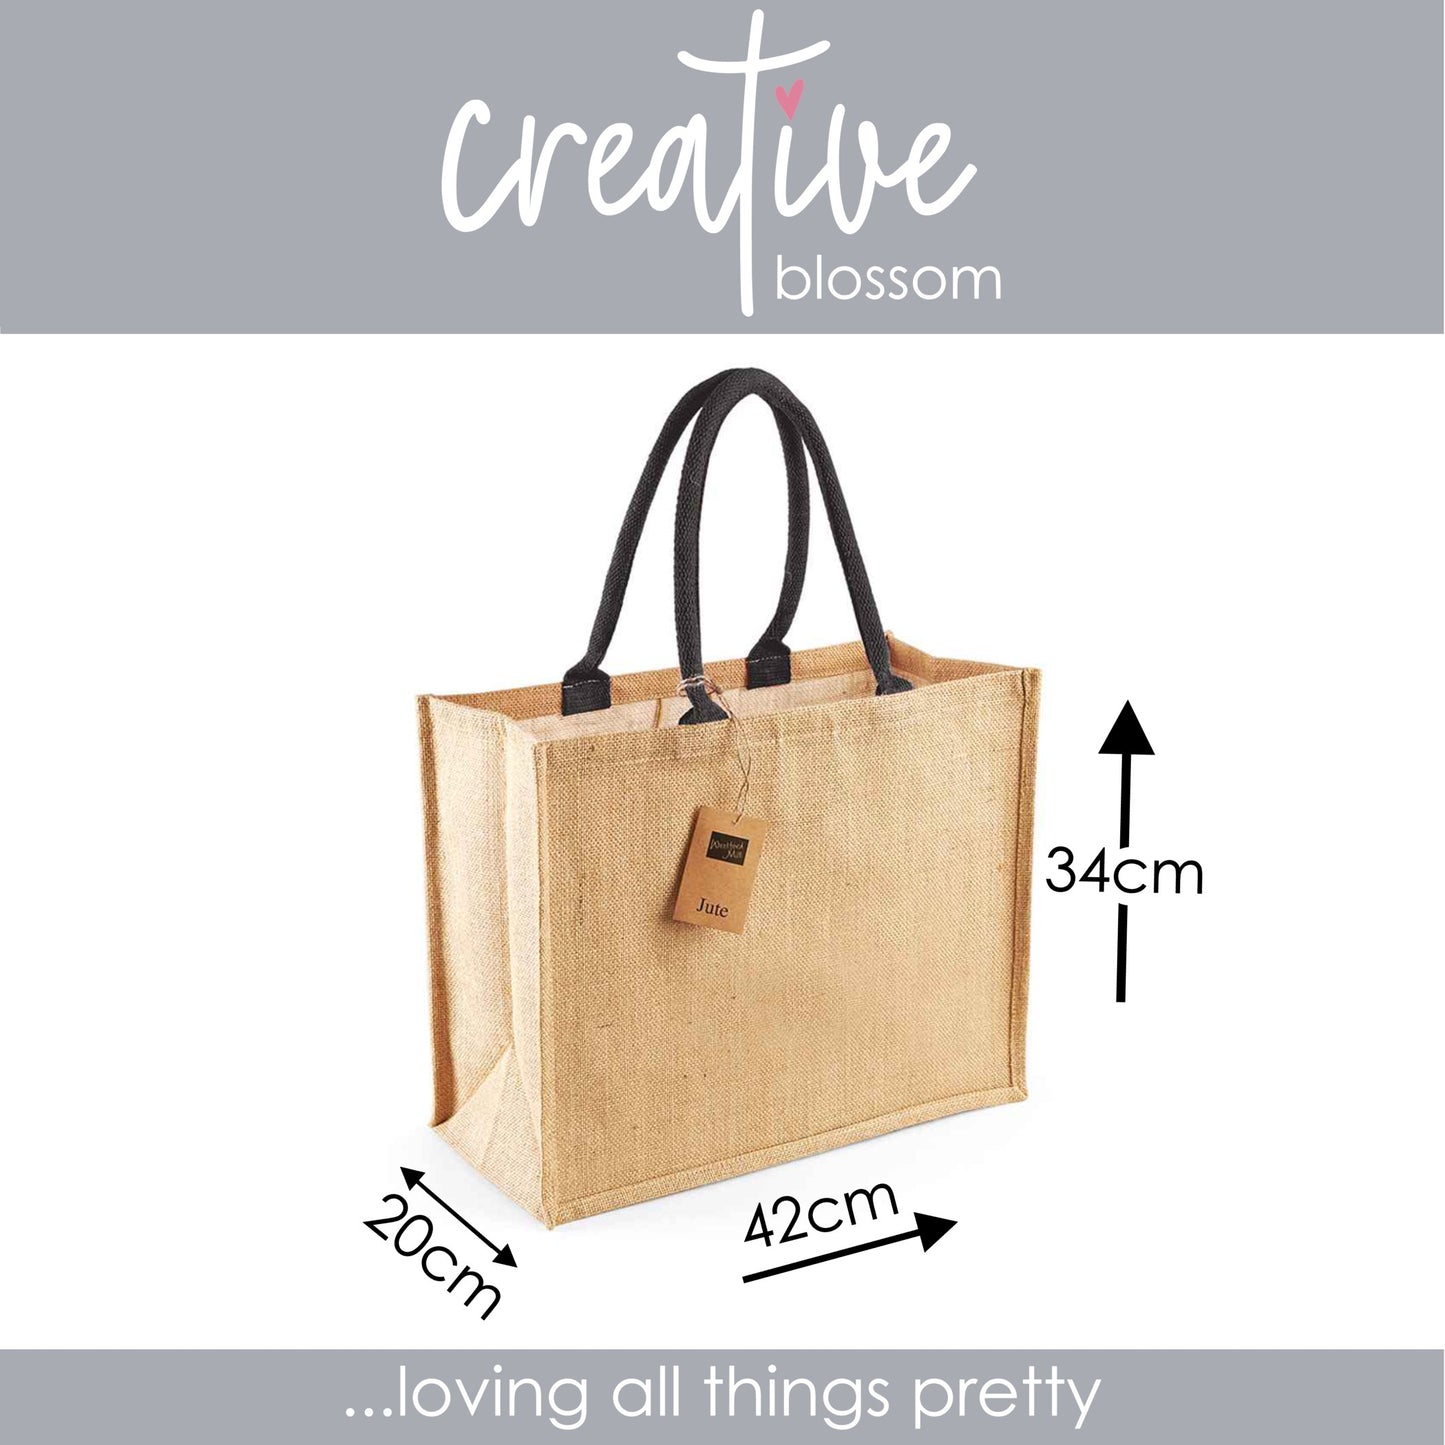 NEW - Embroidered Natural Shopping Bag